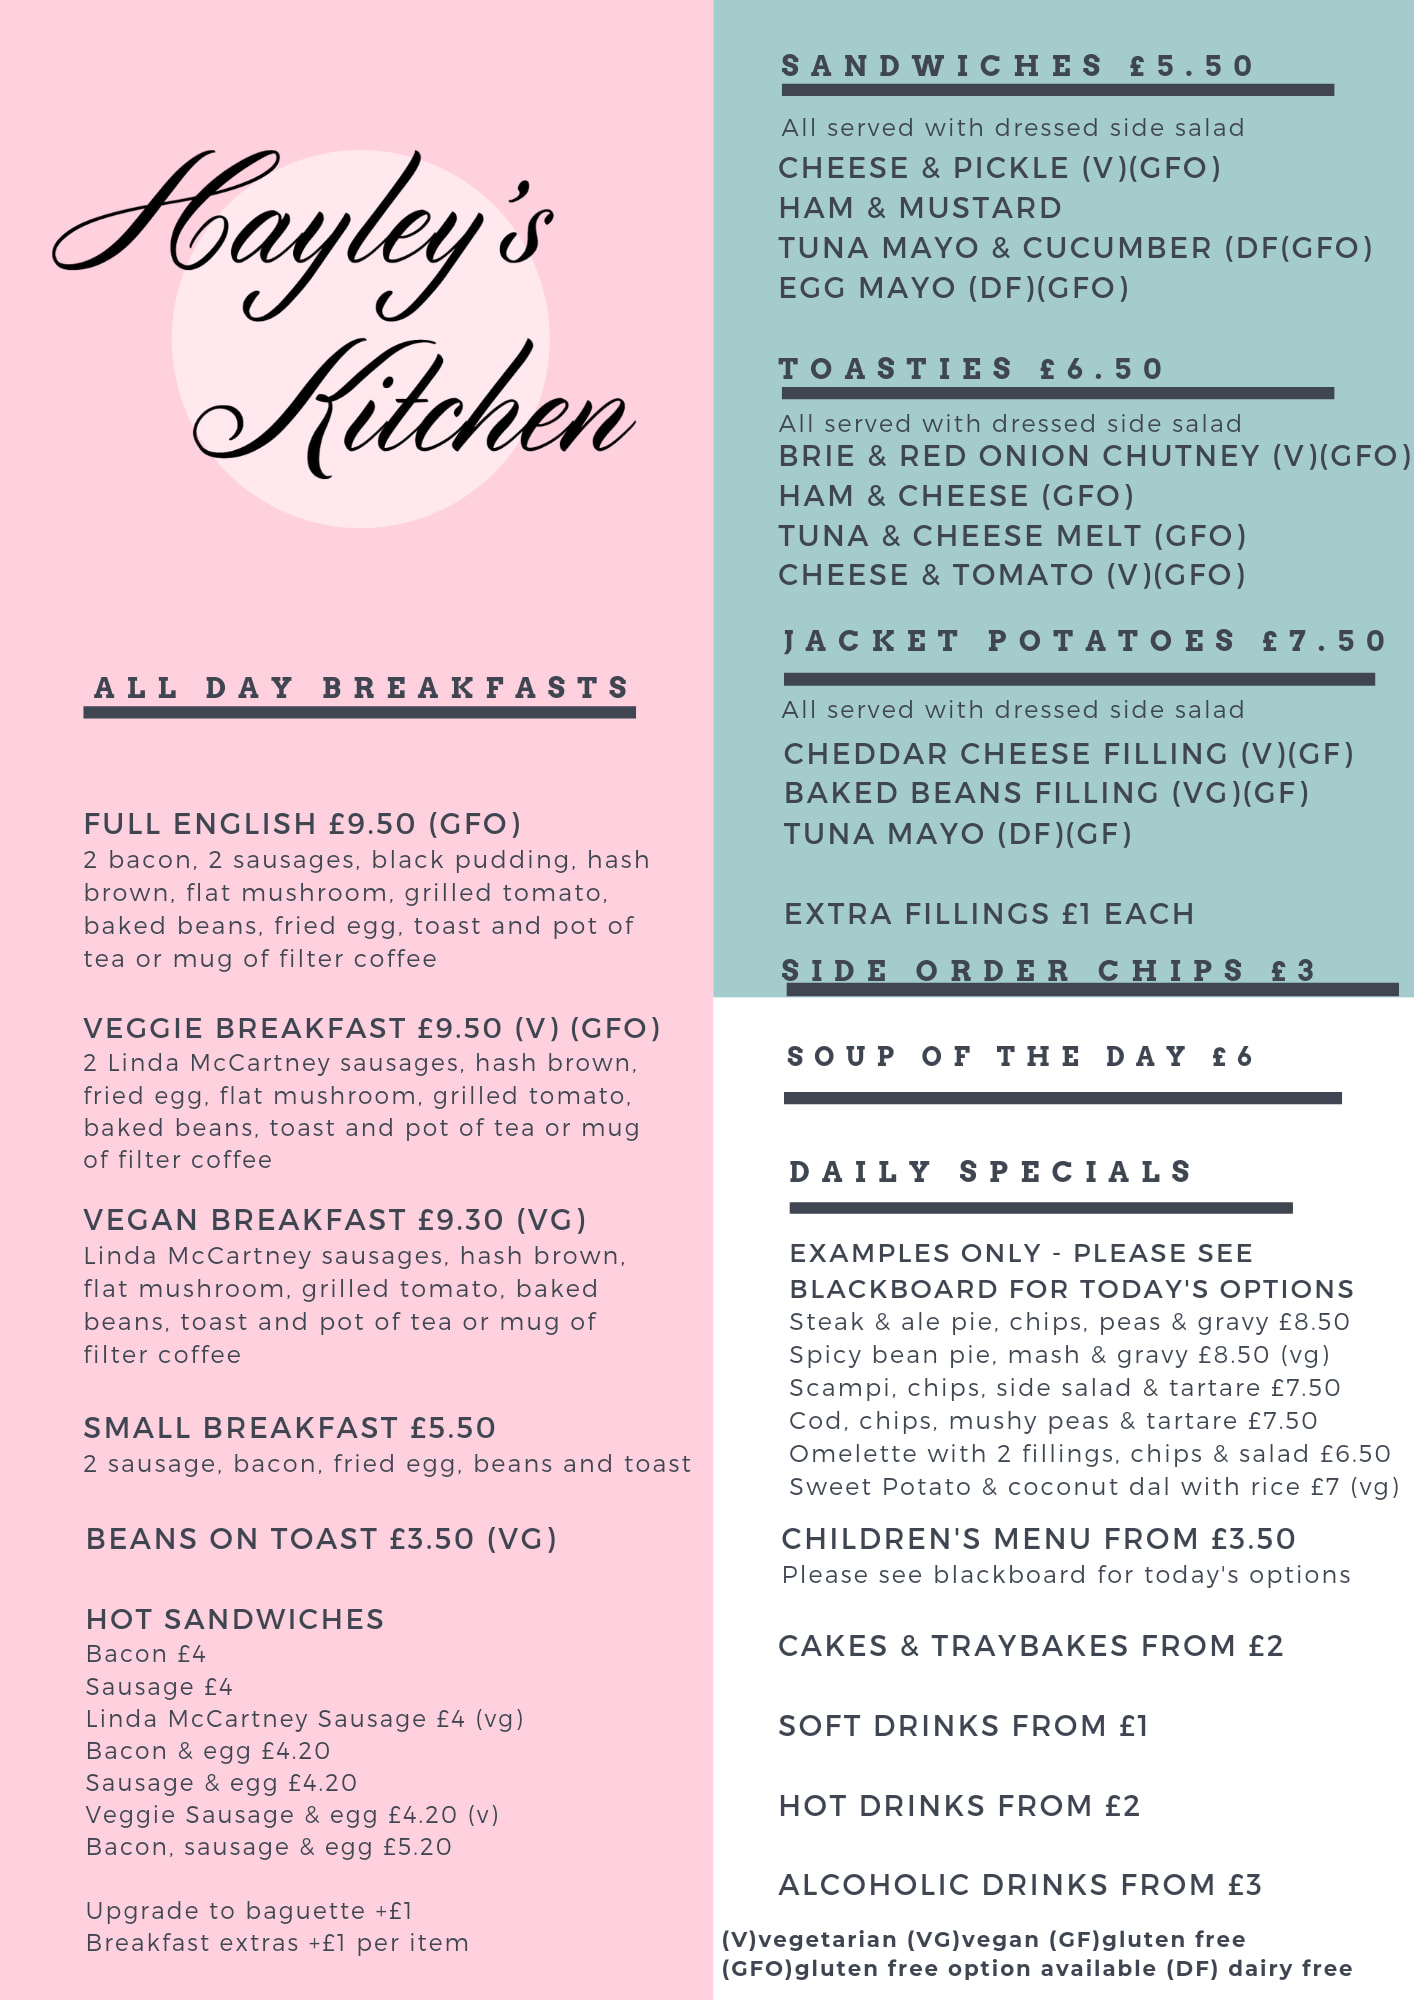 Picture of Hayley’s Kitchen Standard Menu: All Day Breakfasts: Full English £9.50 (GFO) Veggie Breakfast £9.50 (V) (GFO) Linda McCartney Sausages Vegan Breakfast £9.30 (VG) Linda McCartney Sausages Small Breakfast £5.50 Beans on toast £3.50 Hot Sandwiches: Bacon £4 Sausage £4 Linda McCartney Sausage £4 (vg) Bacon and egg £4.20 Sausage and egg £4.20 Veggie sausage and egg £4.20 (v) Bacon, sausage, and egg £5.20 Upgrade to baguette +£1 Breakfast extras +£1 per item Sandwiches £5.50 – all served with dressed side salad Cheese and pickle (v)(gfo) Ham and Mustard Tuna Mayo and cucumber (df) (gfo) Egg Mayo (df) (gfo) Toasties £6.50 – all served with dressed side salad Brie and red onion chutney (v) (gfo) Ham and cheese (gfo) Tuna and cheese melt (gfo) Cheese and tomato (v)(gfo) Jacket Potatoes £7.50 – all served with a dressed side salad Cheddar cheese filling (v) (gf) Baked beans filling (vg) (gf) Tuna Mayo (df) (gf) Extra fillings £1 each Side order chips £3 Soup of the day £6 Daily Specials – Examples only, please see blackboard for today’s options: Steak and ale pie, chips, peas and gravy £8.50 Spicy bean pie, mash and gravy (vg) Scampi, chips, mushy peas and tartare £7.50 Cod, chips, mushy peas and tartare £7.50 Omelette with 2 fillings, chips and salad £6.50 Sweet Potato and coconut dal with rice £7 (vg) Children’s menu from £3.50 Please see blackboard for today’s options Cakes and traybakes from £2 Soft drinks from £1 Hot drinks from £2 Alcoholic drinks from £3 (V) Vegetarian (VG) Vegan (GF) Gluten Free (GFO) Gluten Free Option Available (DF) Dairy Free